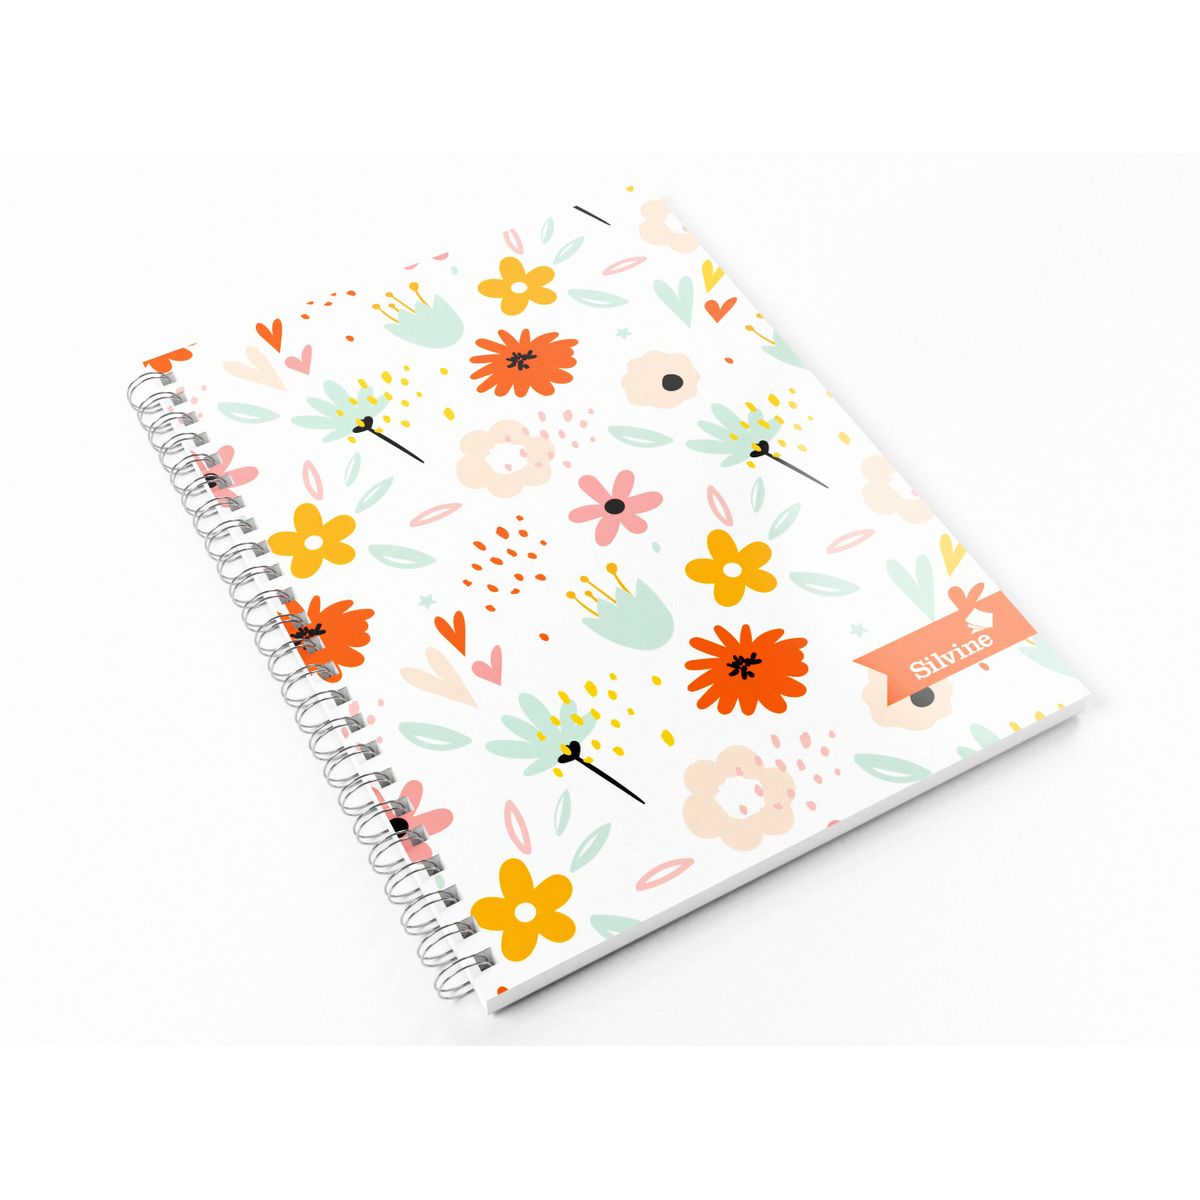 Silvine A5 Twinwire Marlene West Floral White Notebook 160 Pages RRP 3.86 CLEARANCE XL 1.50